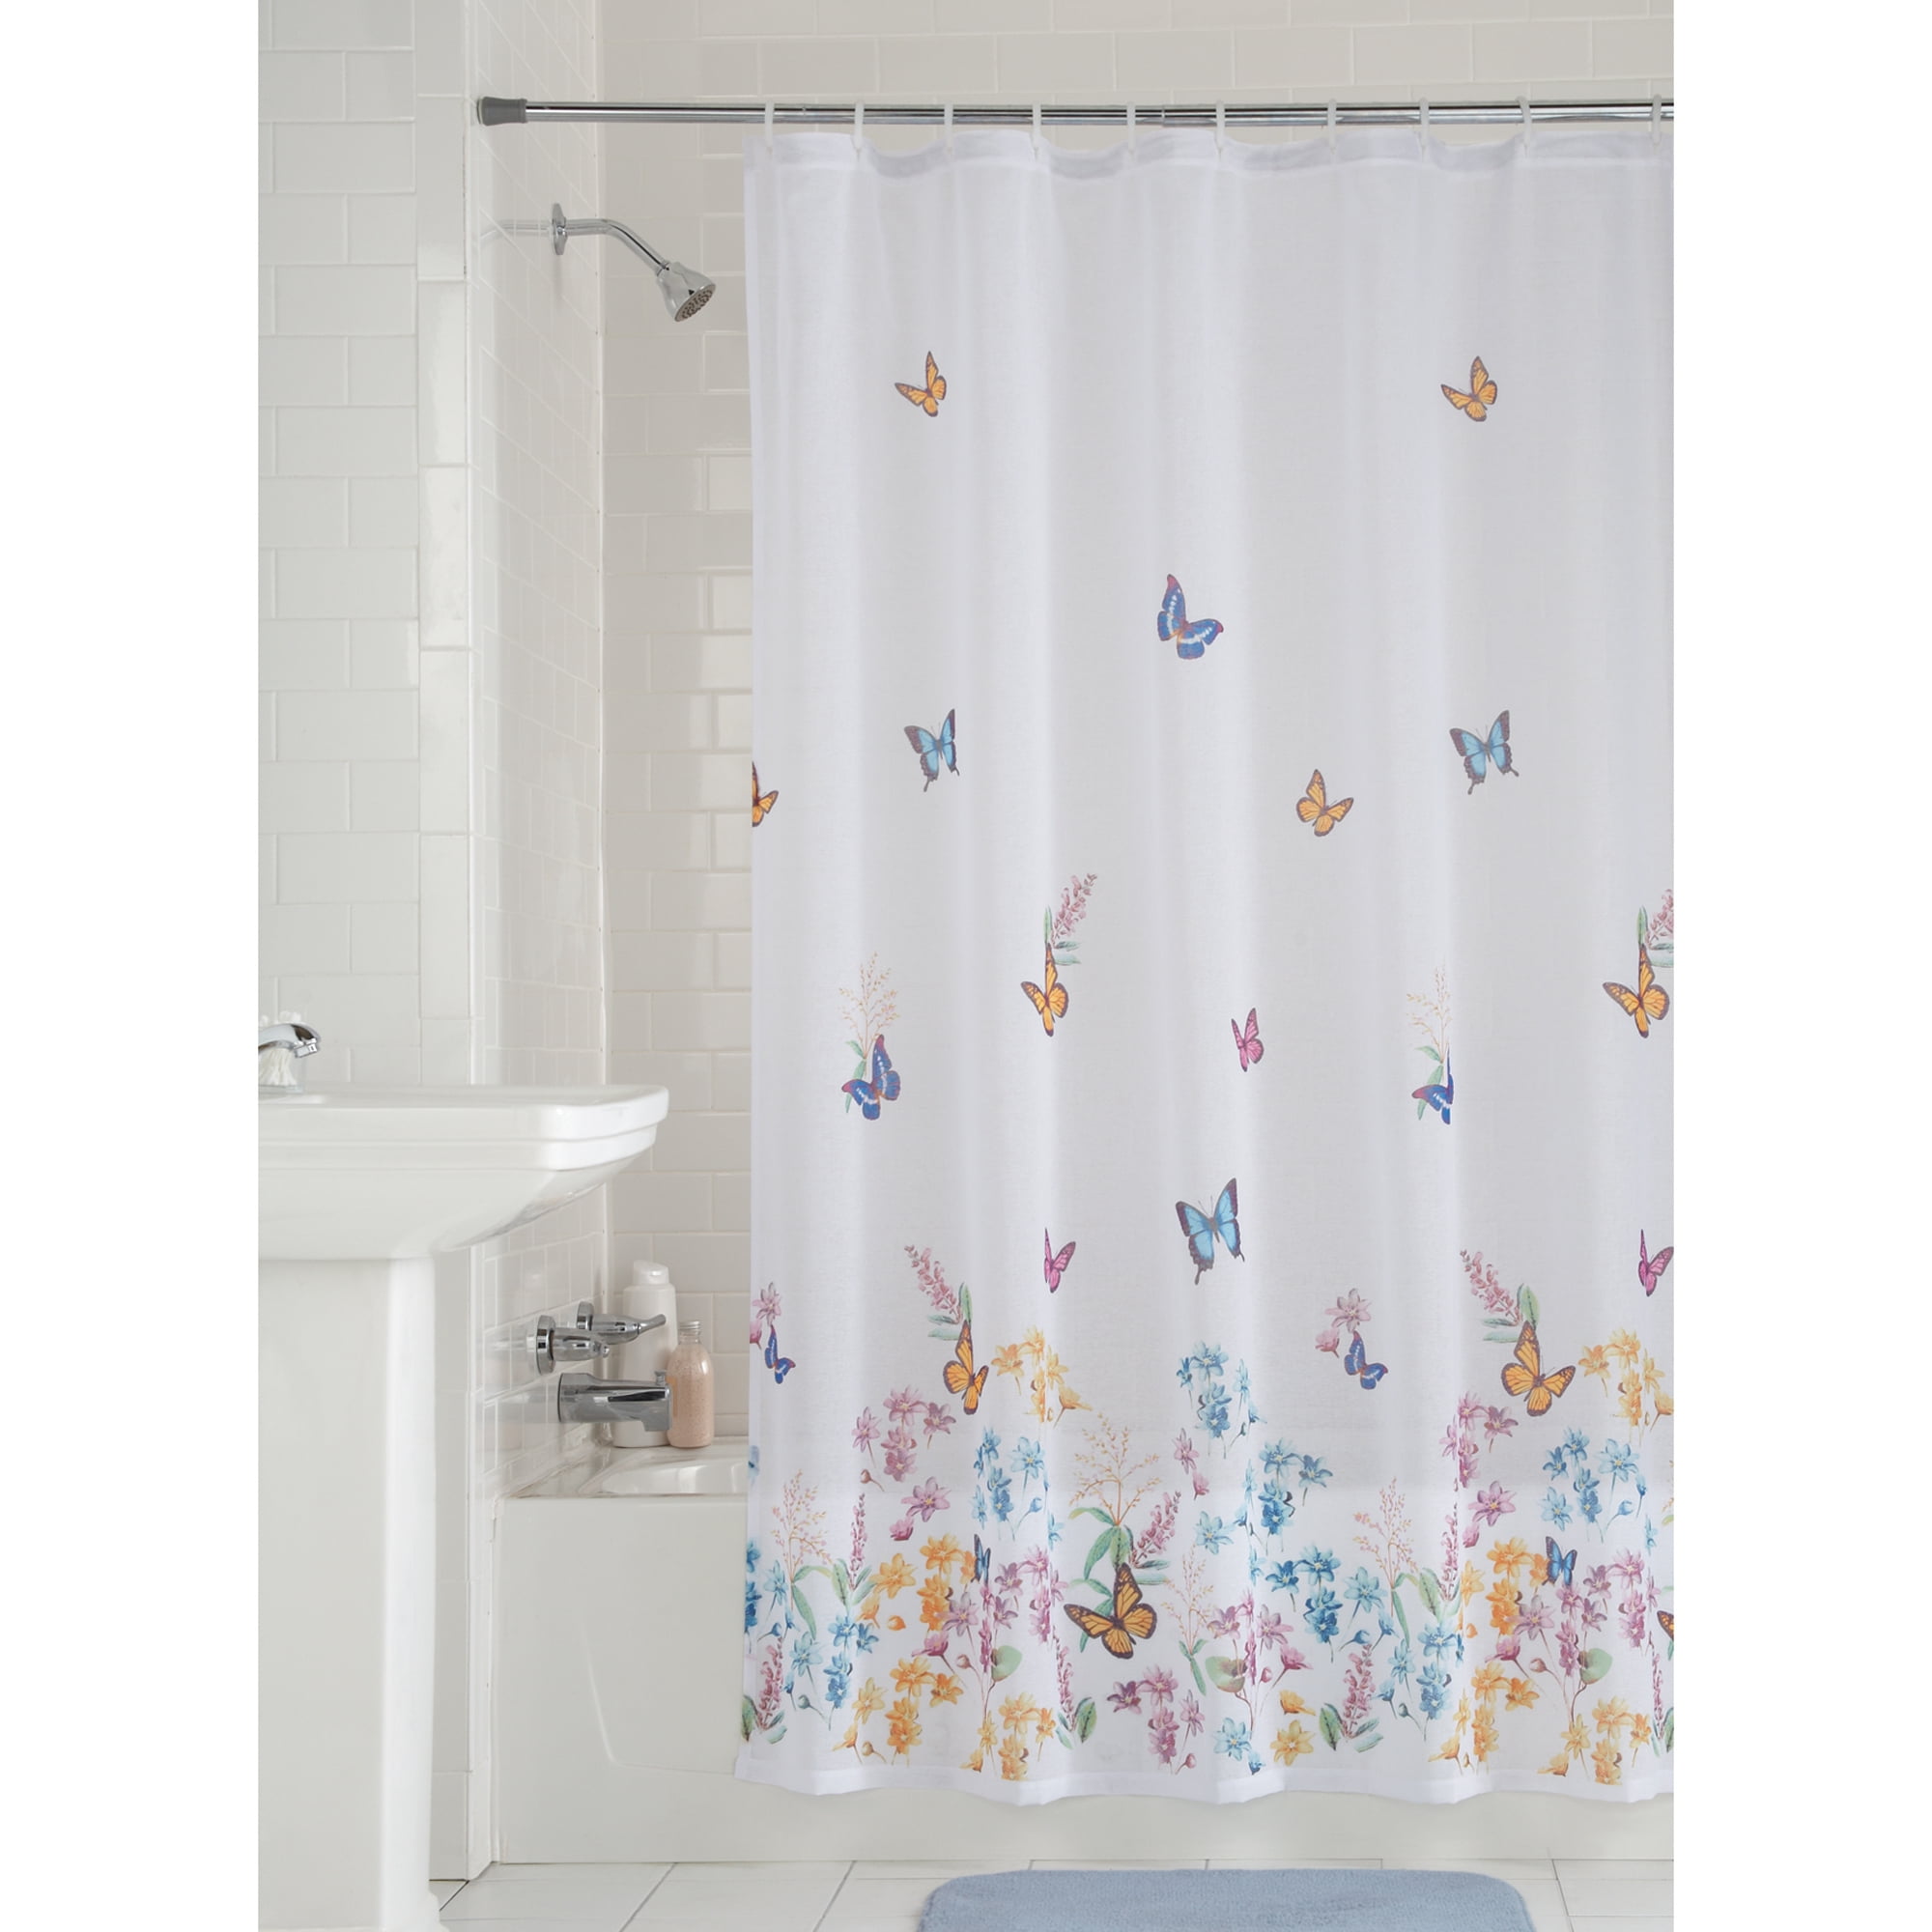 Details about   Colored Hearts Hand Painted Polyester Fabric Bath Shower Curtain & 12 Hooks 71" 